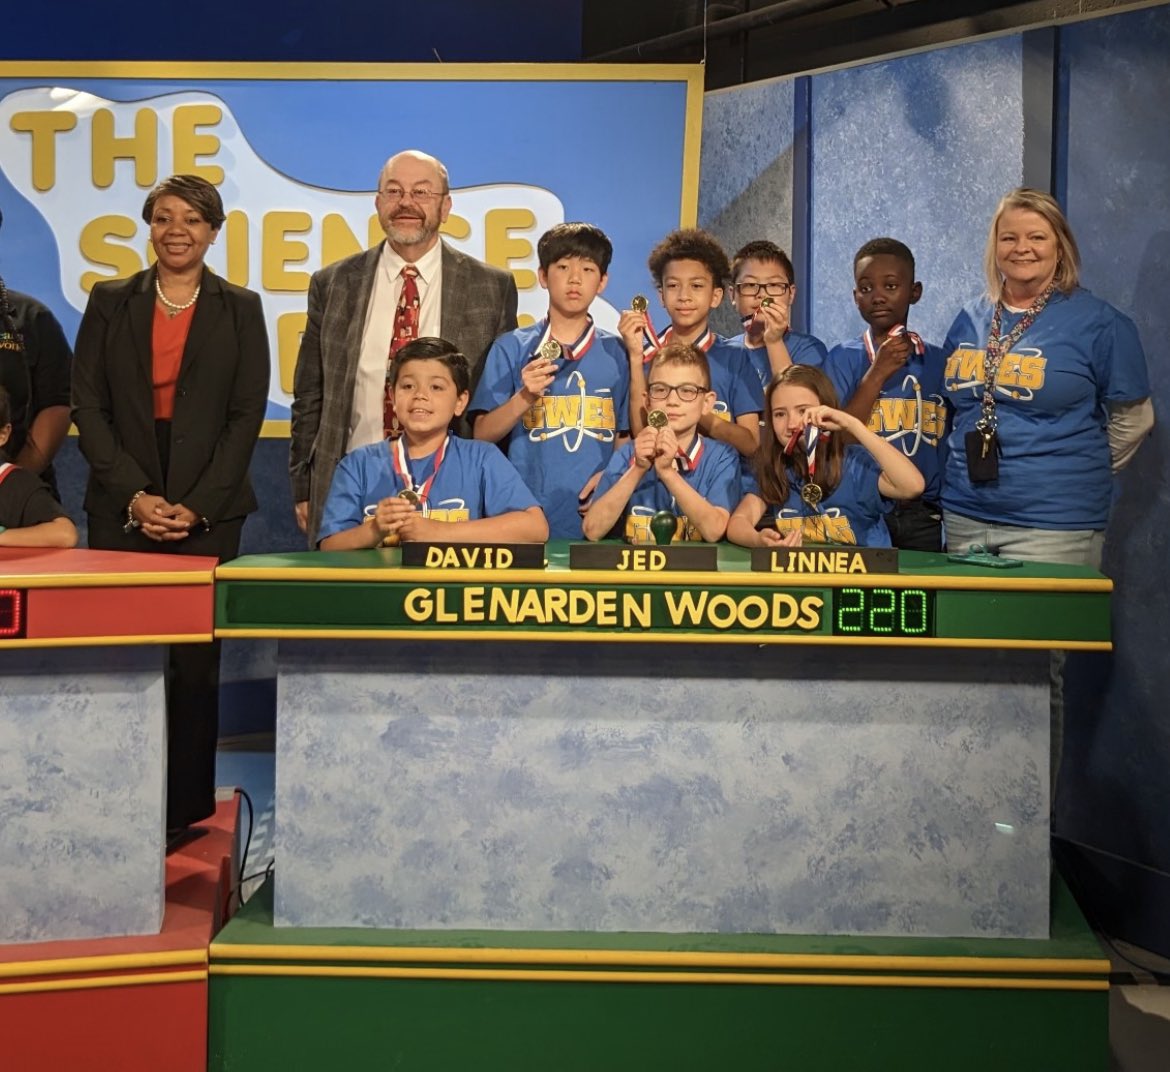 Congratulations to our GWES Science Bowl Team and Mrs. Foster for leading the effort!!! We won the final game making this the 8th win for our school! We are #GWESProud! #PGCPSProud 💙🐯💛@gwes_pta @PGCPSTAG @pgcps @PgcpsScience @TonyaW0621 @drhelencoley @drmonicaceo